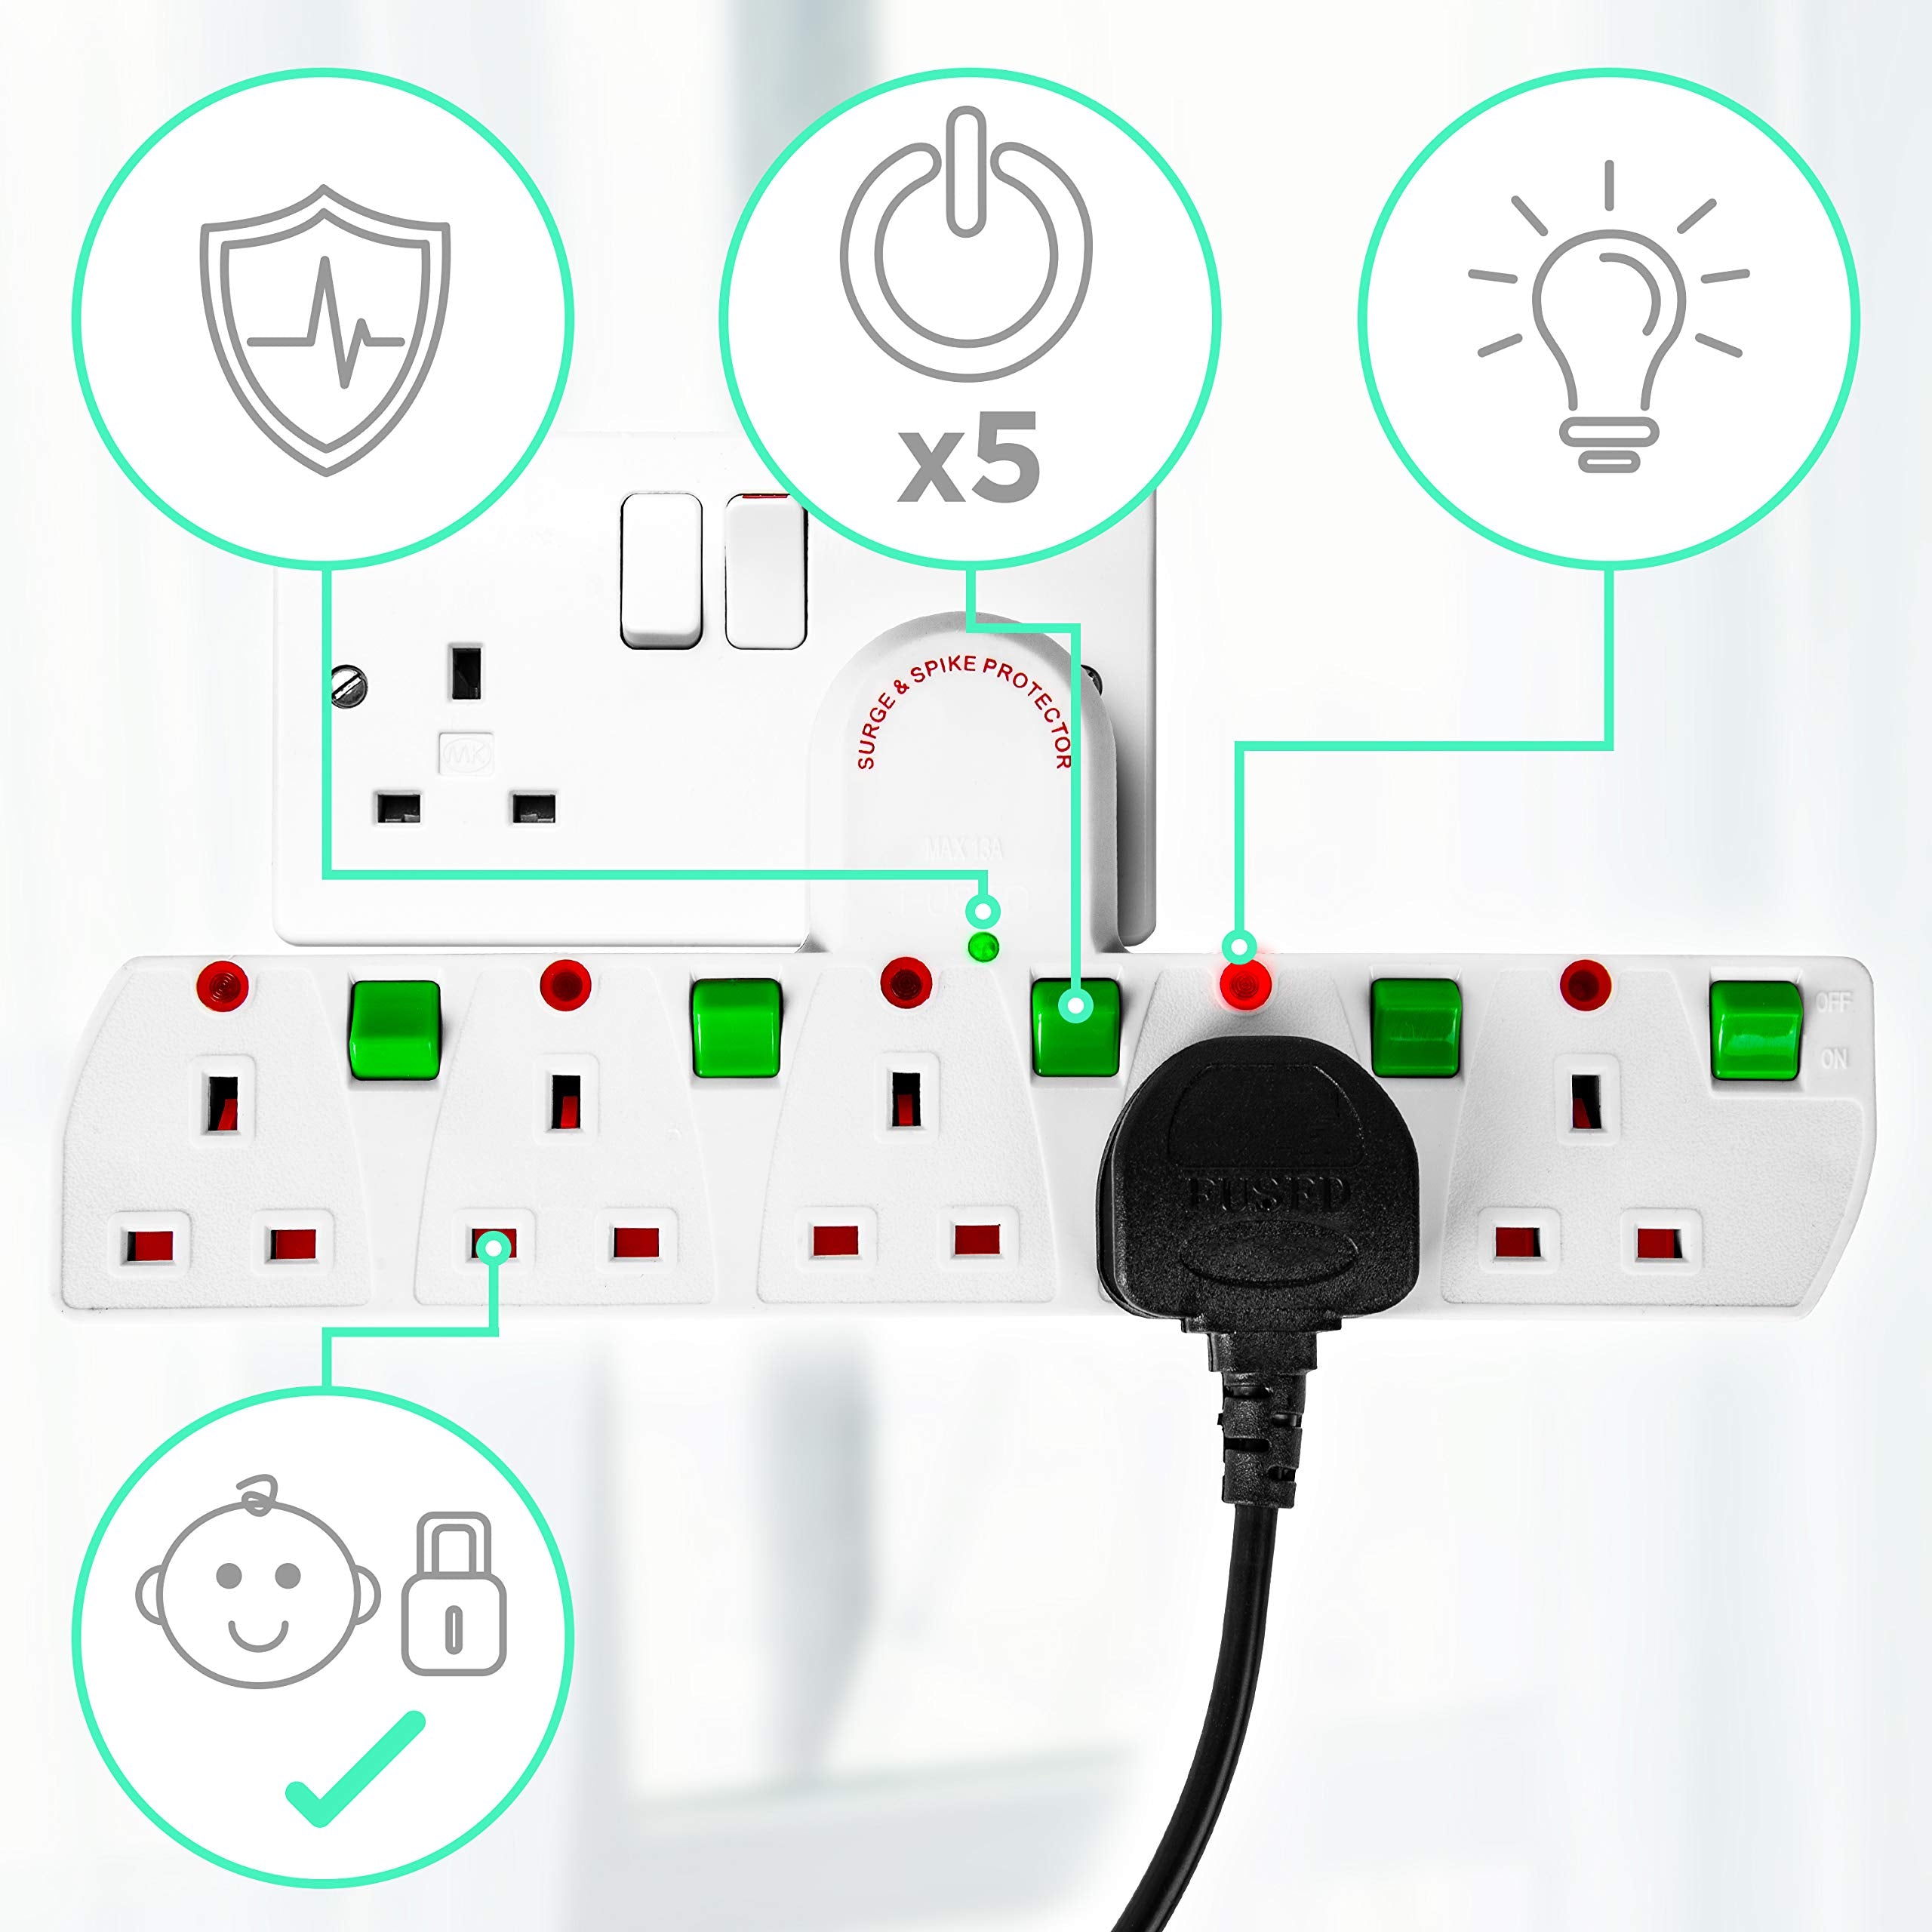 Duronic S125W 5 Way UK Plug Surge Protected Power Extension Adaptor Multi Socket | Switched | White| Switches Turns 1 Socket Into 5, Not 4 | Engineered To Tell You When Surge Is On